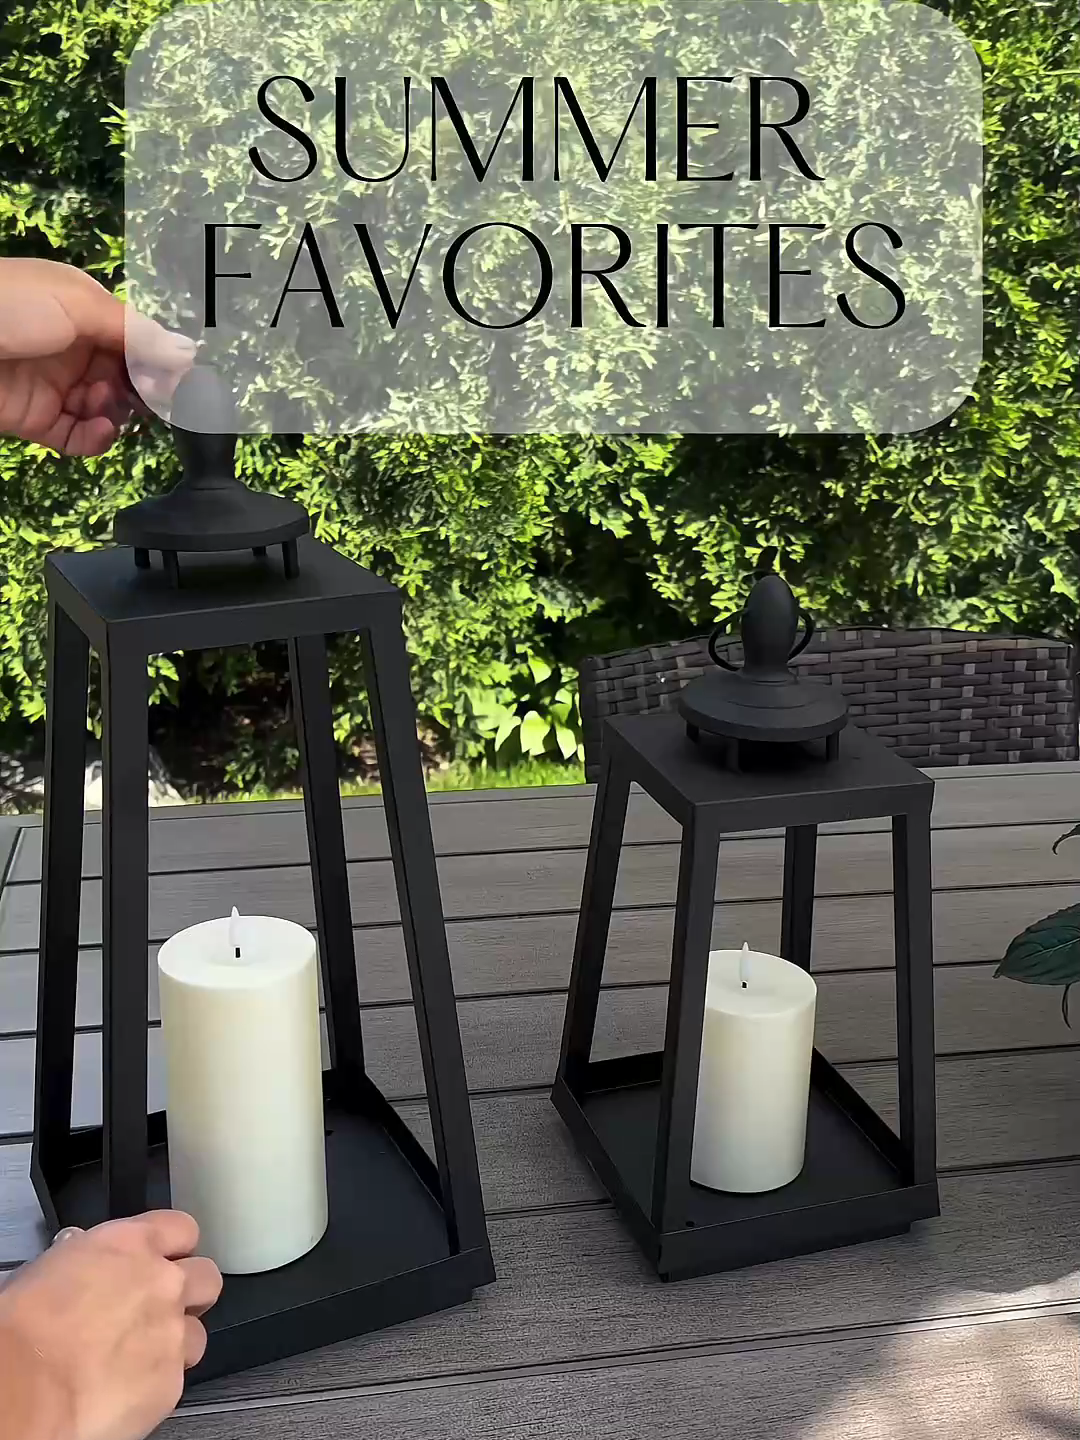 Amazon Summer  Must Haves ✨️ All Products Link's in Bio Go Amazon Storefront Search ( Summer Finds ) You Find These Products This video is being shared for promotional purposes or to assist others, Video owner is  @simplystagedandstyled  #TikTokMadeMeBuyIt #tiktokfinds #fypシ゚ #foryou #amazonfinds #amzonmusthaves #amazonfavorites #homegoods #summerfavorite #summerfinds #summerrefresh #summergoals #summerhouse #summerstyle #summerdecor #summergadgets #goodthing #viral #houseoftiktok #housetour #homedecor #homeimprovement #homegoodsfinds #musthaves #bkowners #Outdoors #outdoorgadgets